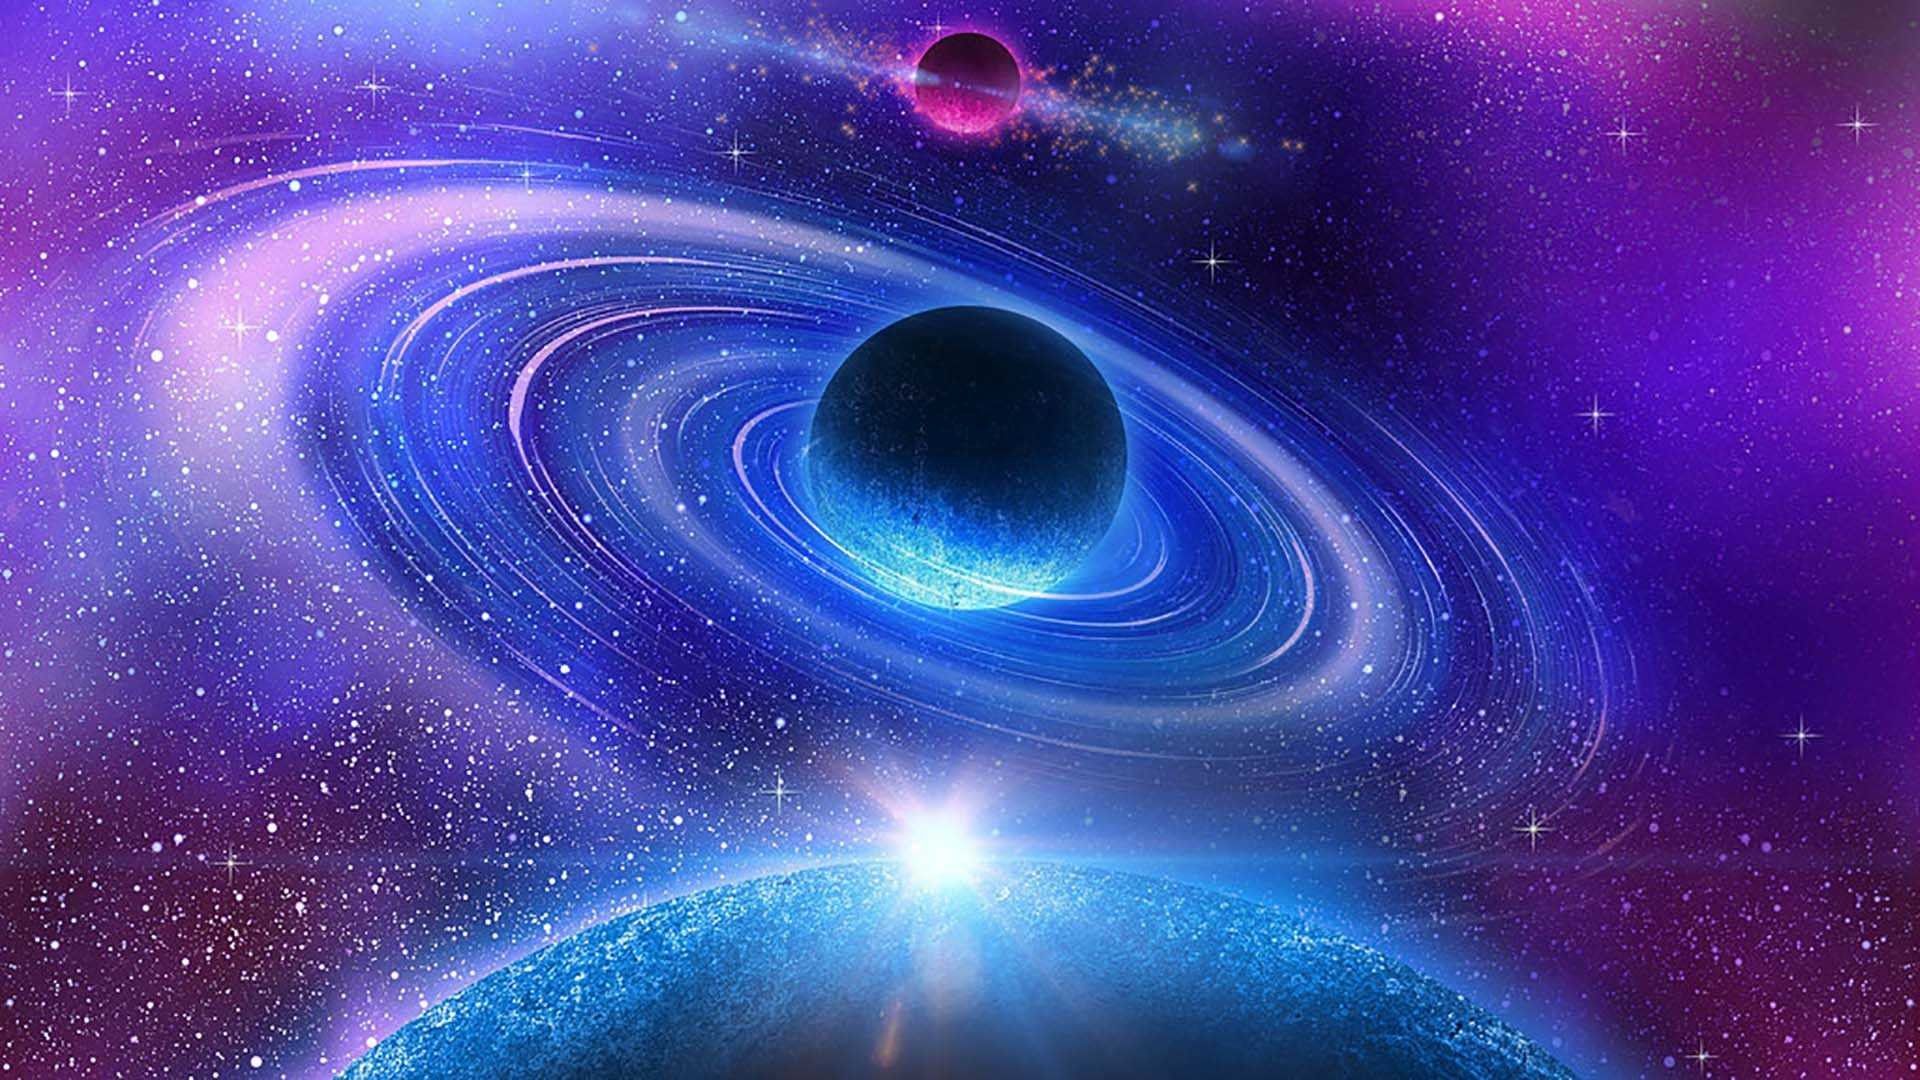 80+ Cool Galaxy Wallpapers